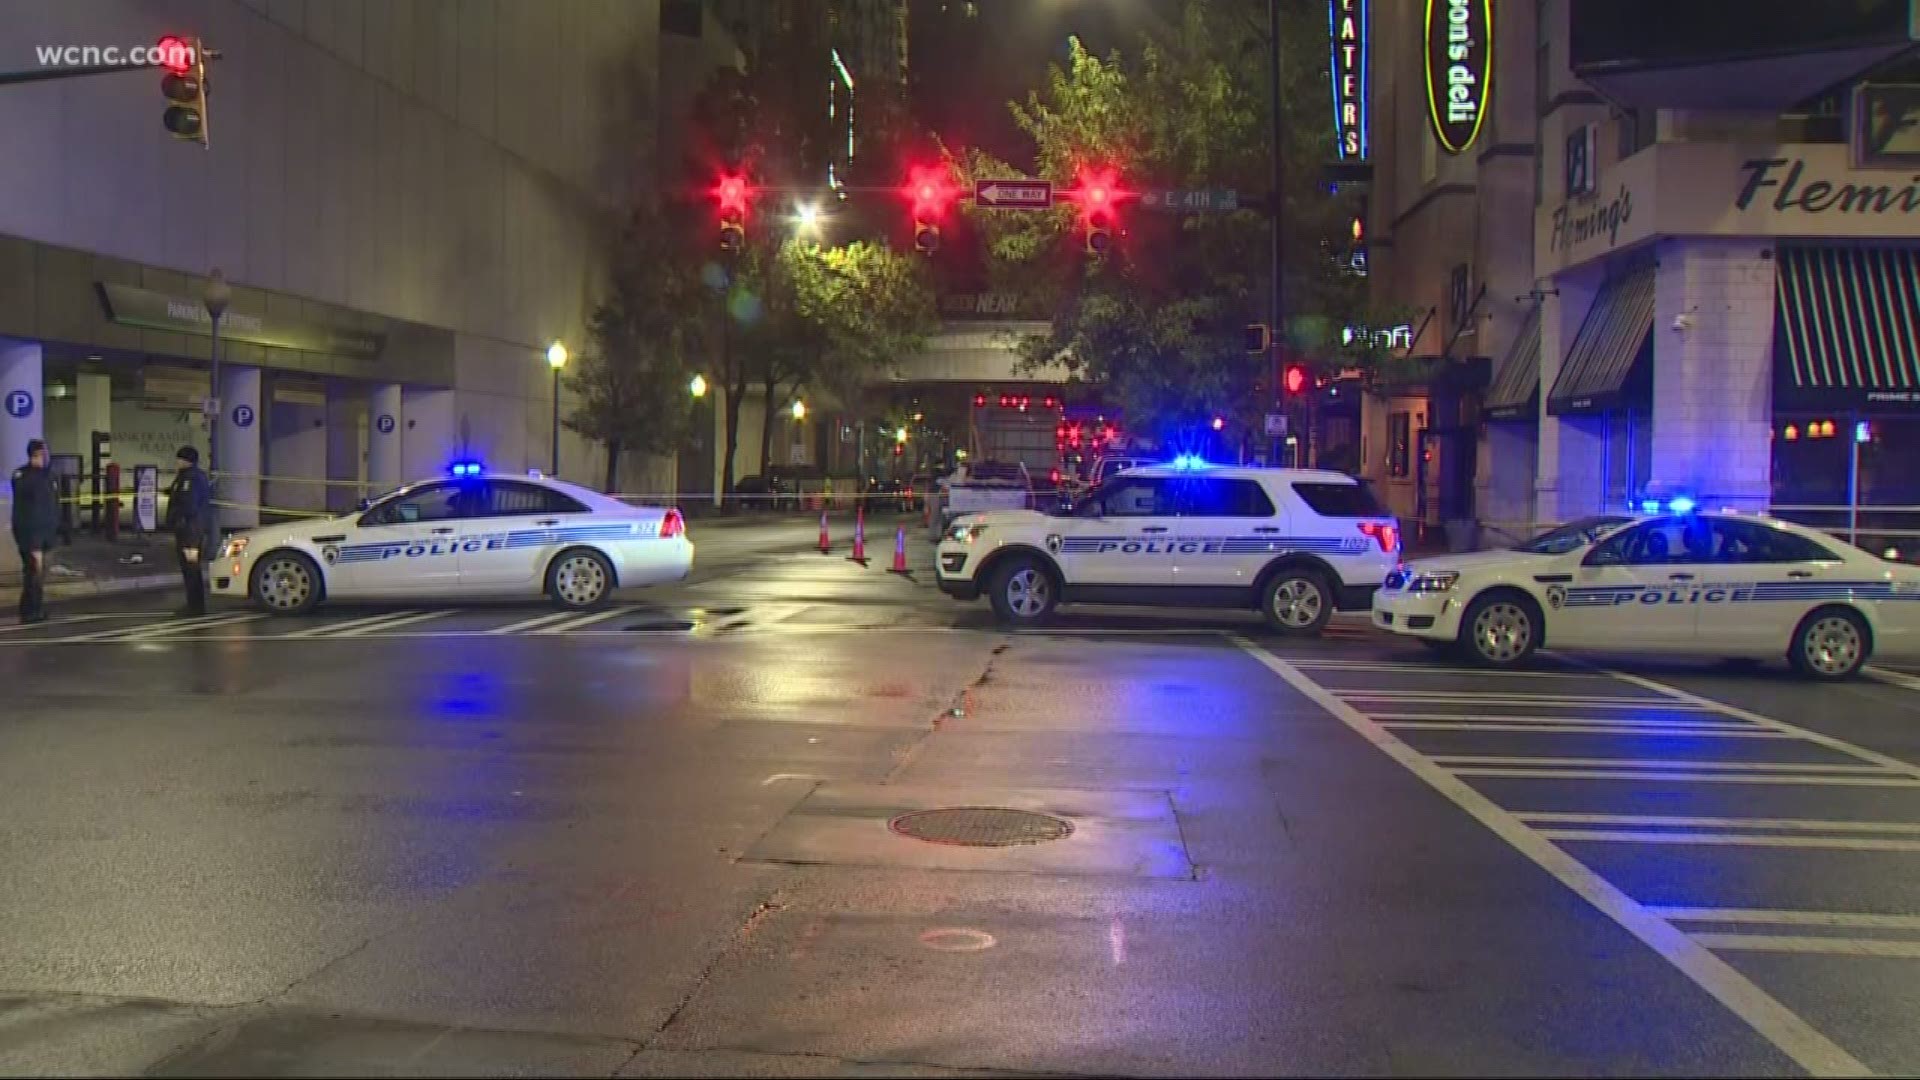 One person was killed and another was injured in a police shooting outside the Epicentre in uptown Charlotte Friday morning.